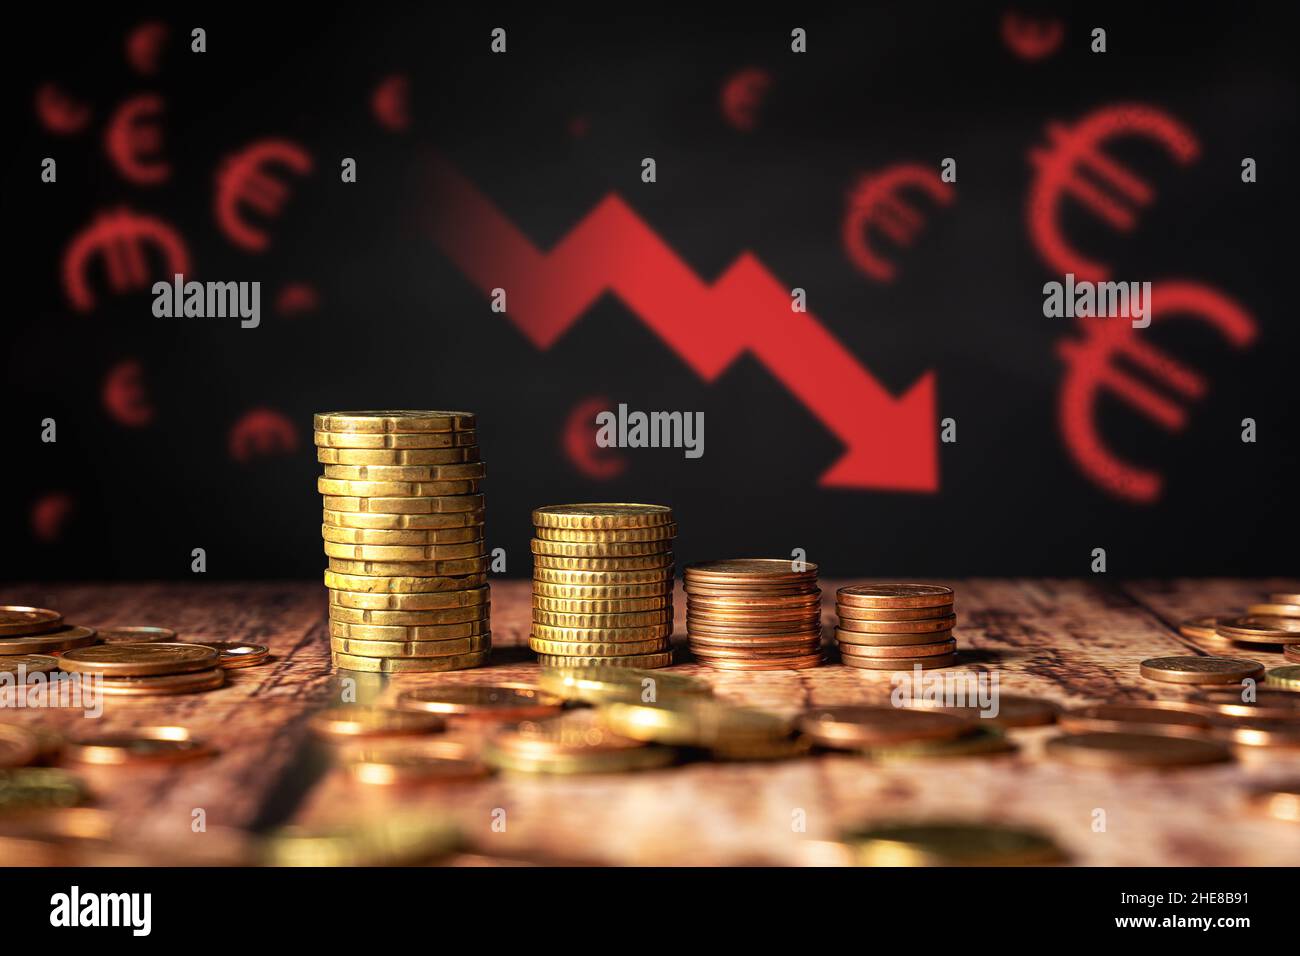 Inflation Of Money And Currency On A Stack Of Coins Stock Photo